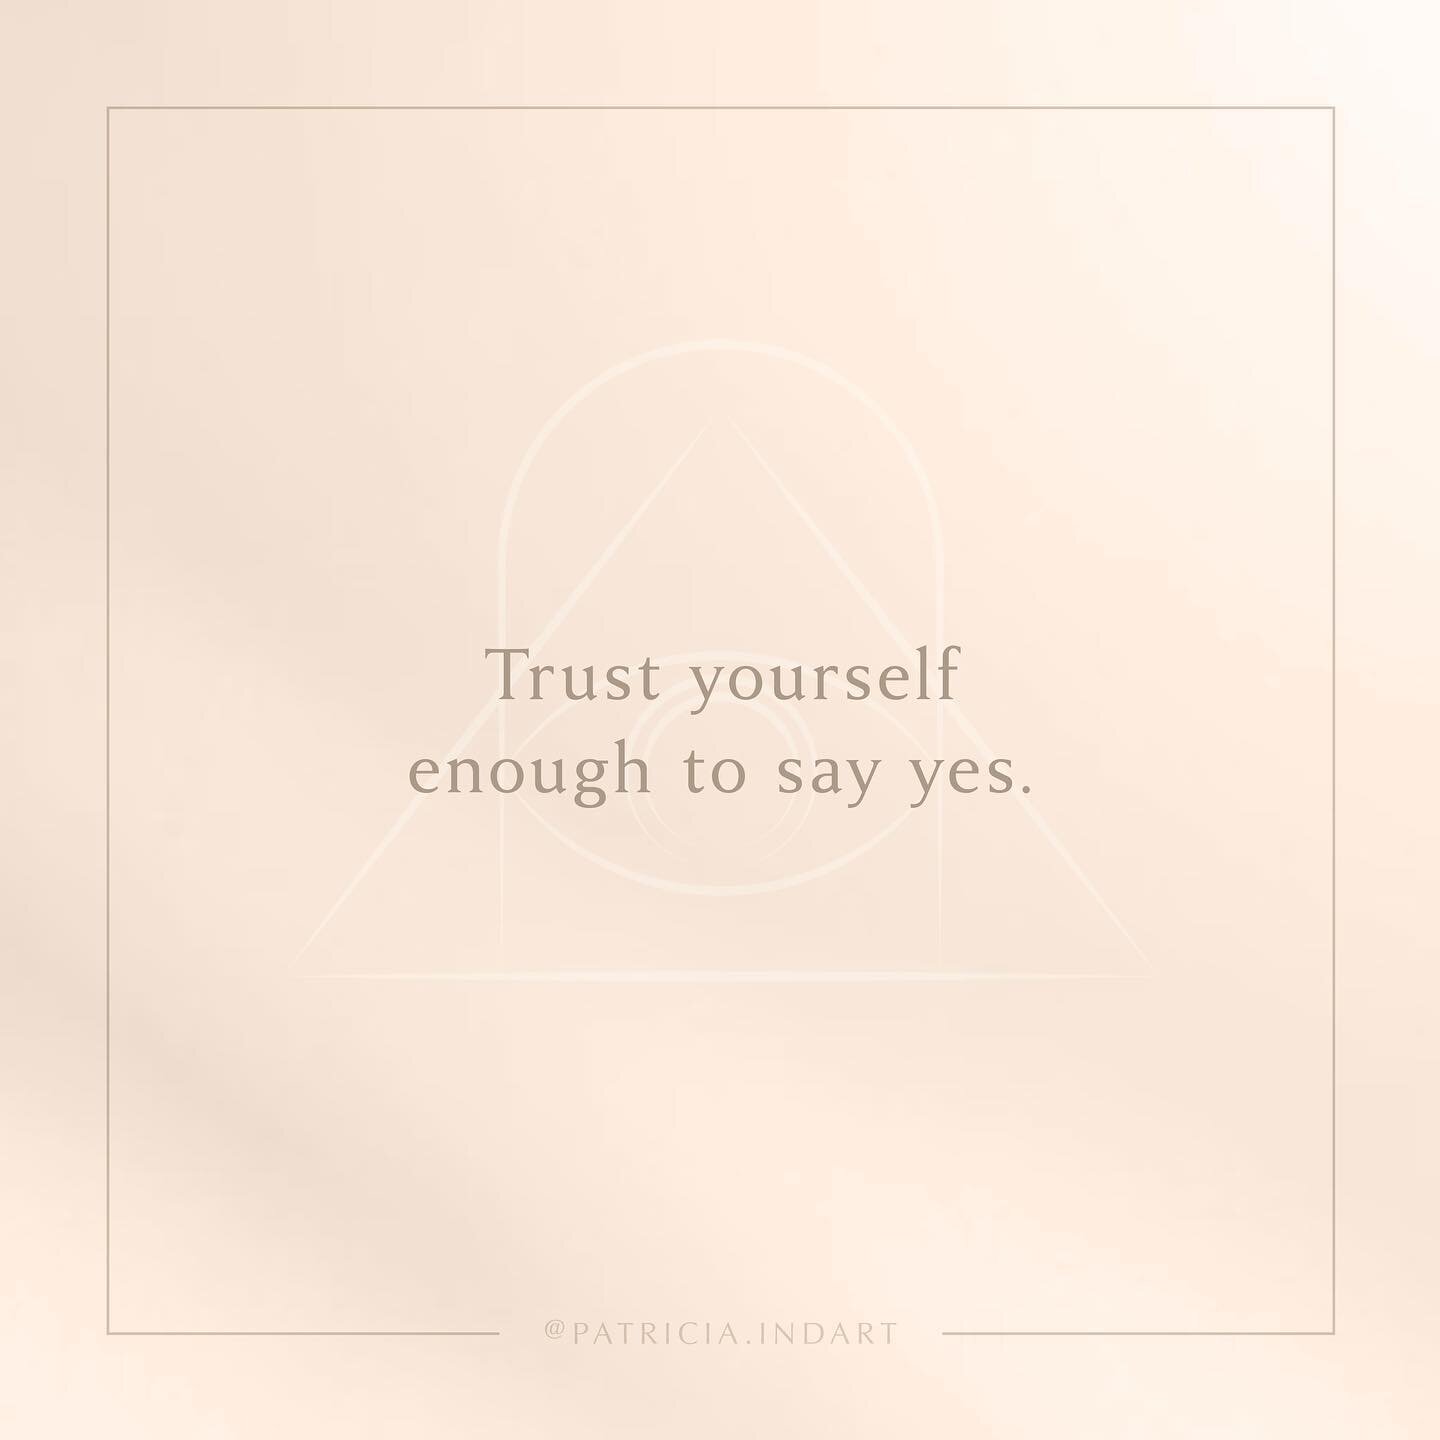 Yesterday was the new moon. It marked the beginning of a turning point in which we&rsquo;re being invited into a time of newness. With this invitation, will you trust yourself enough to say yes? Will you trust that this is happening in divine timing 